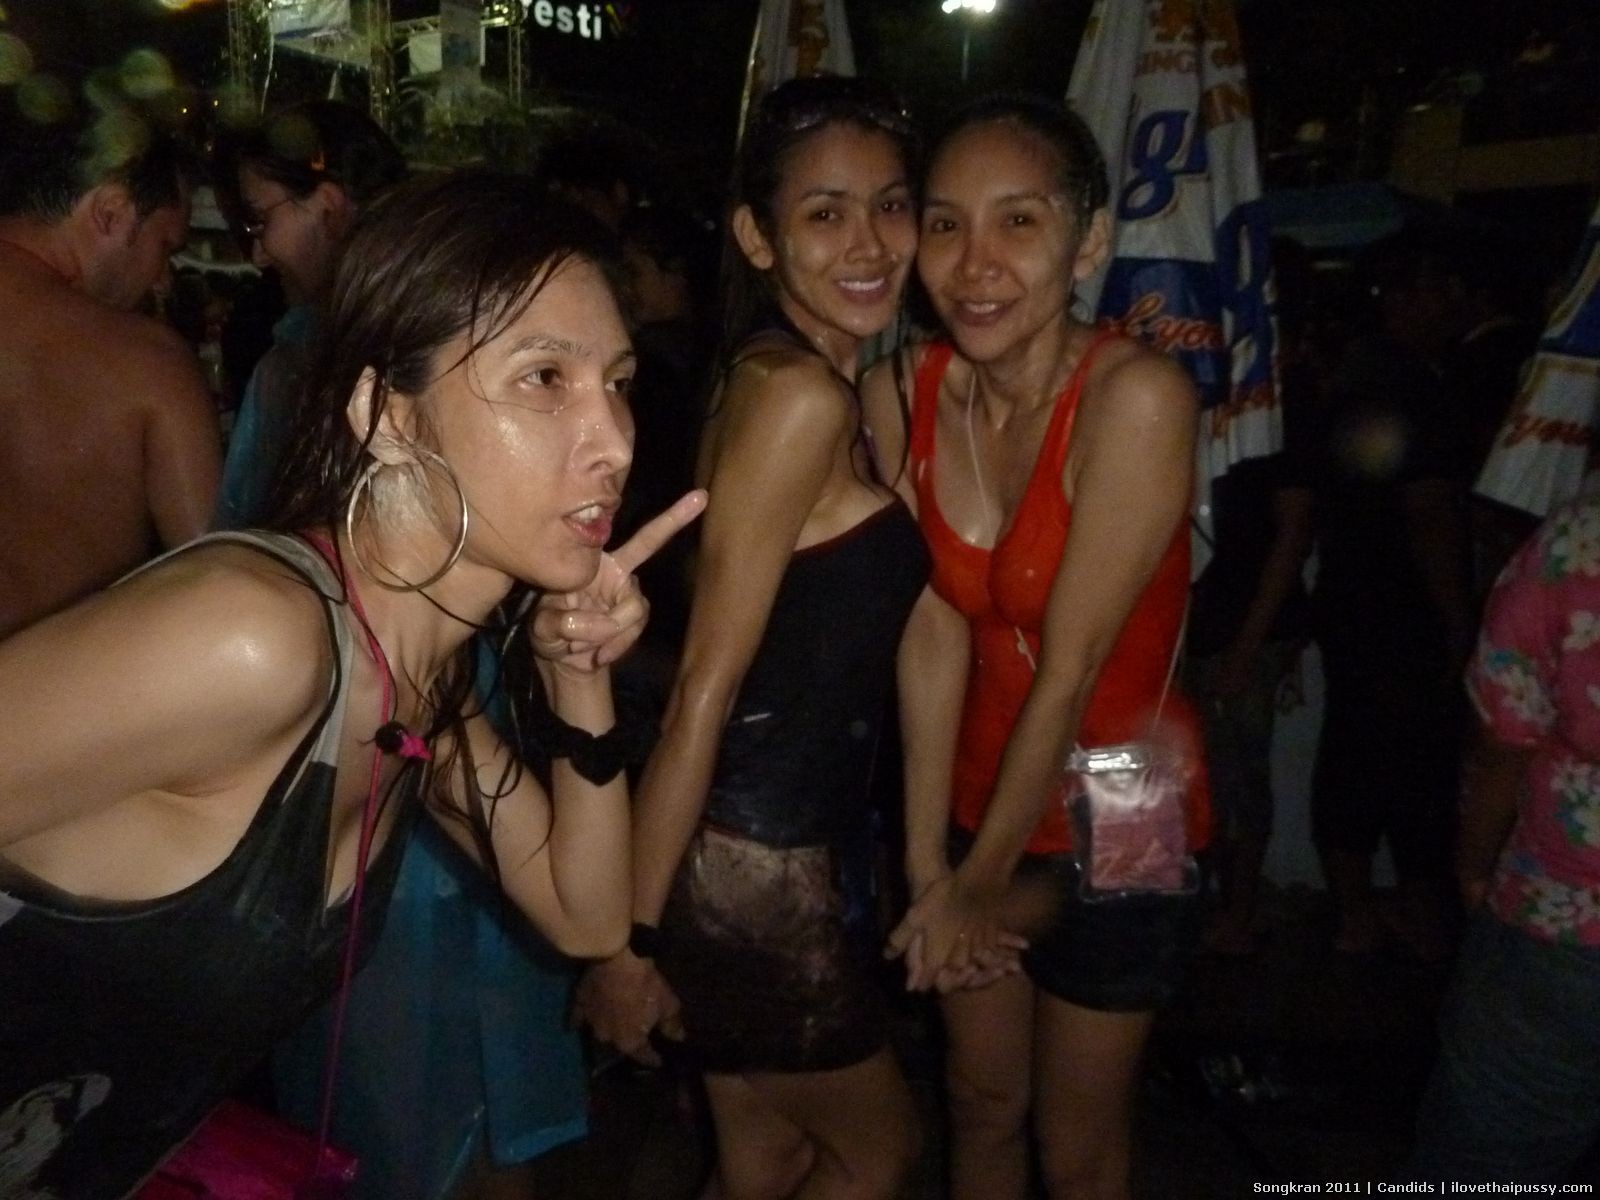 Real Hookers from Thailand spreading and fucking sex tourist asian street meat #67671550